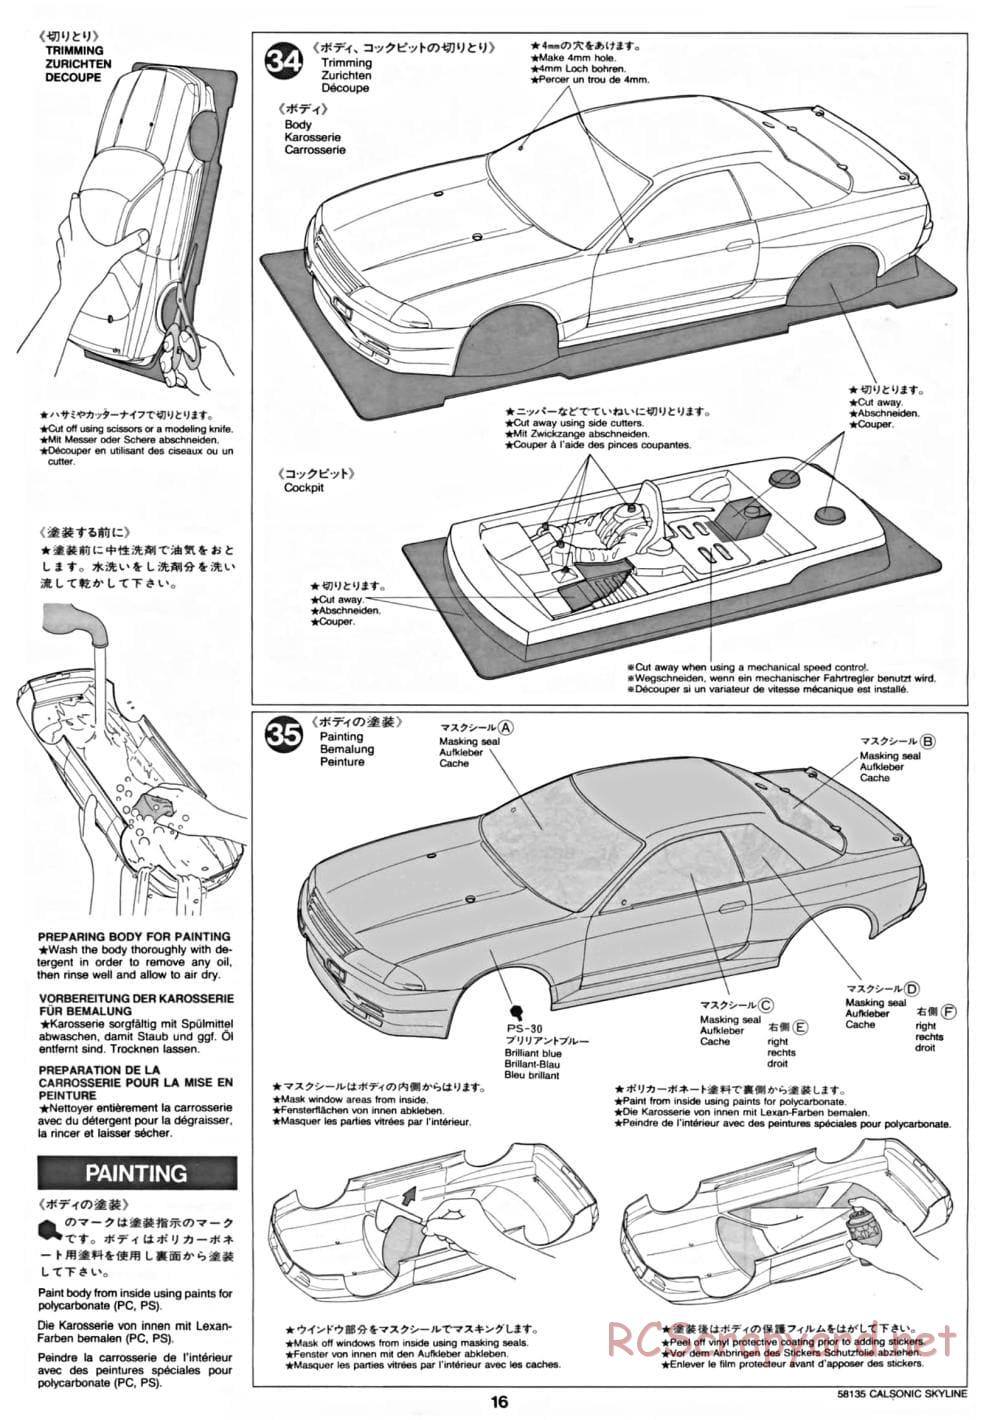 Tamiya - Calsonic Skyline GT-R Gr.A - TA-02 Chassis - Manual - Page 16